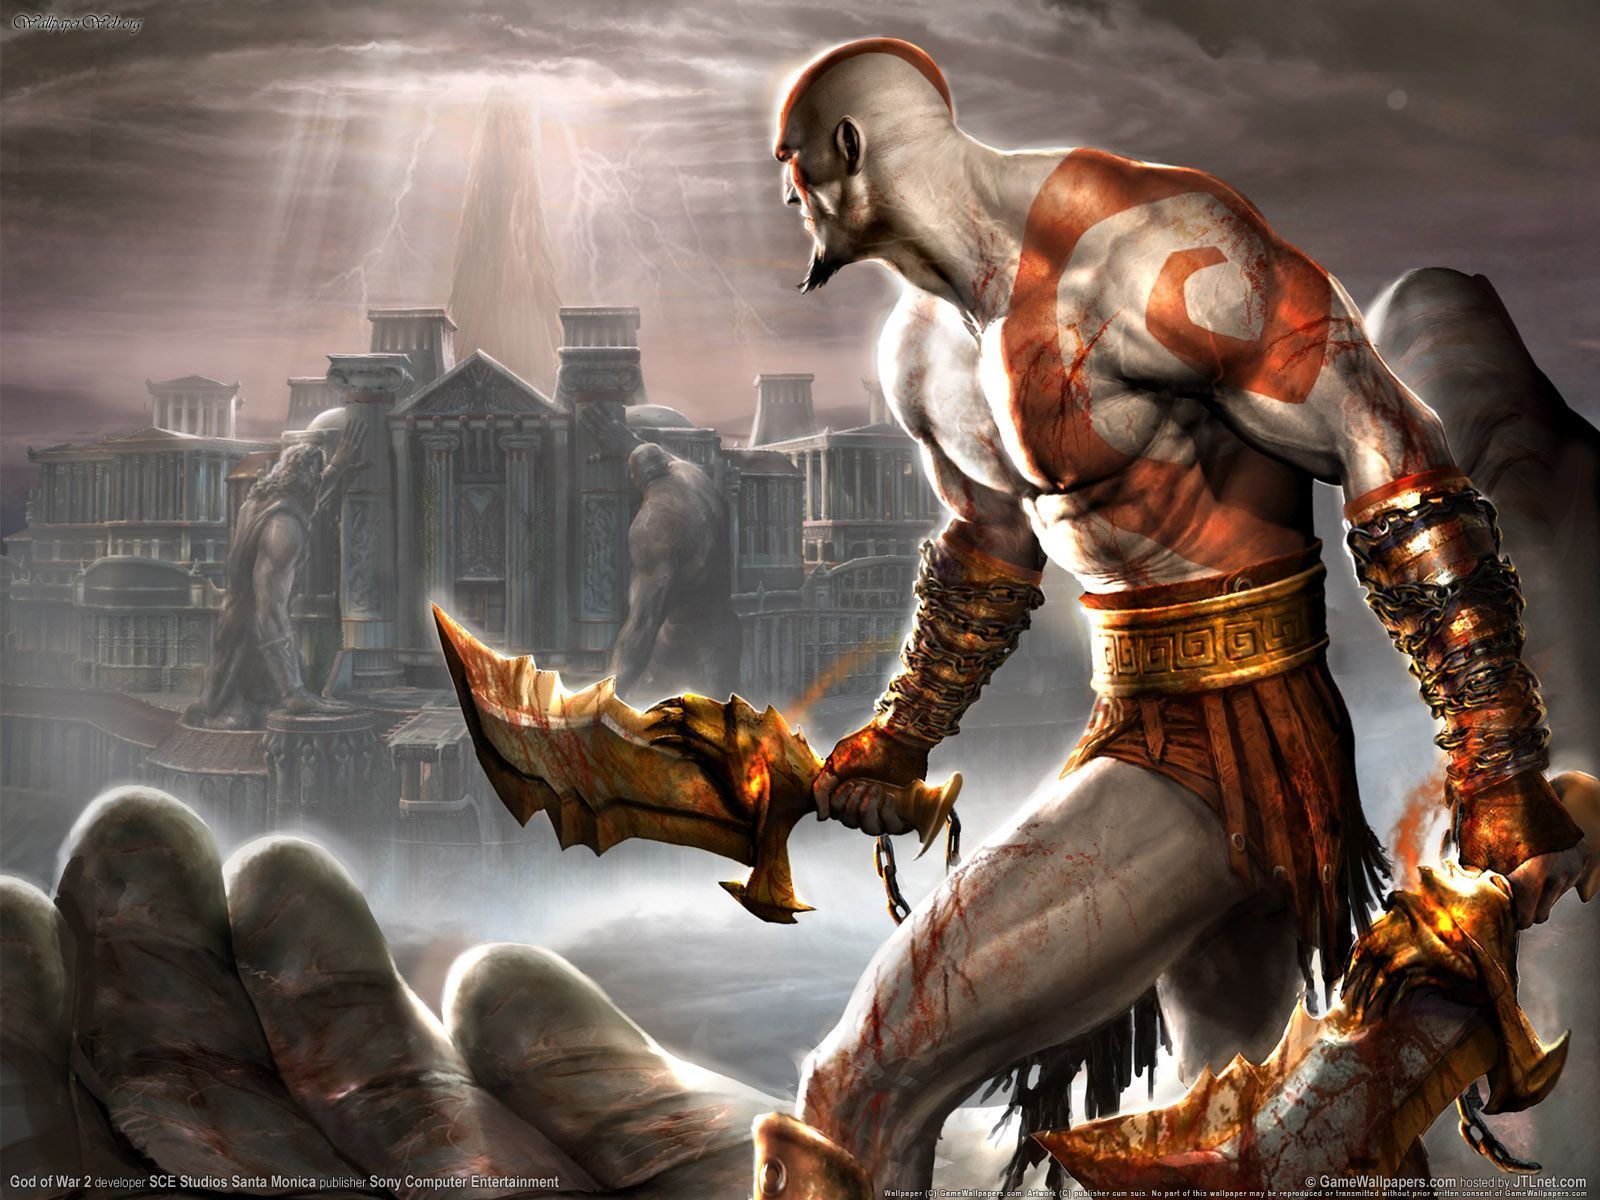 GOD OF WAR Screenwriters Talk Script’s Grounded Approach, How We Meet